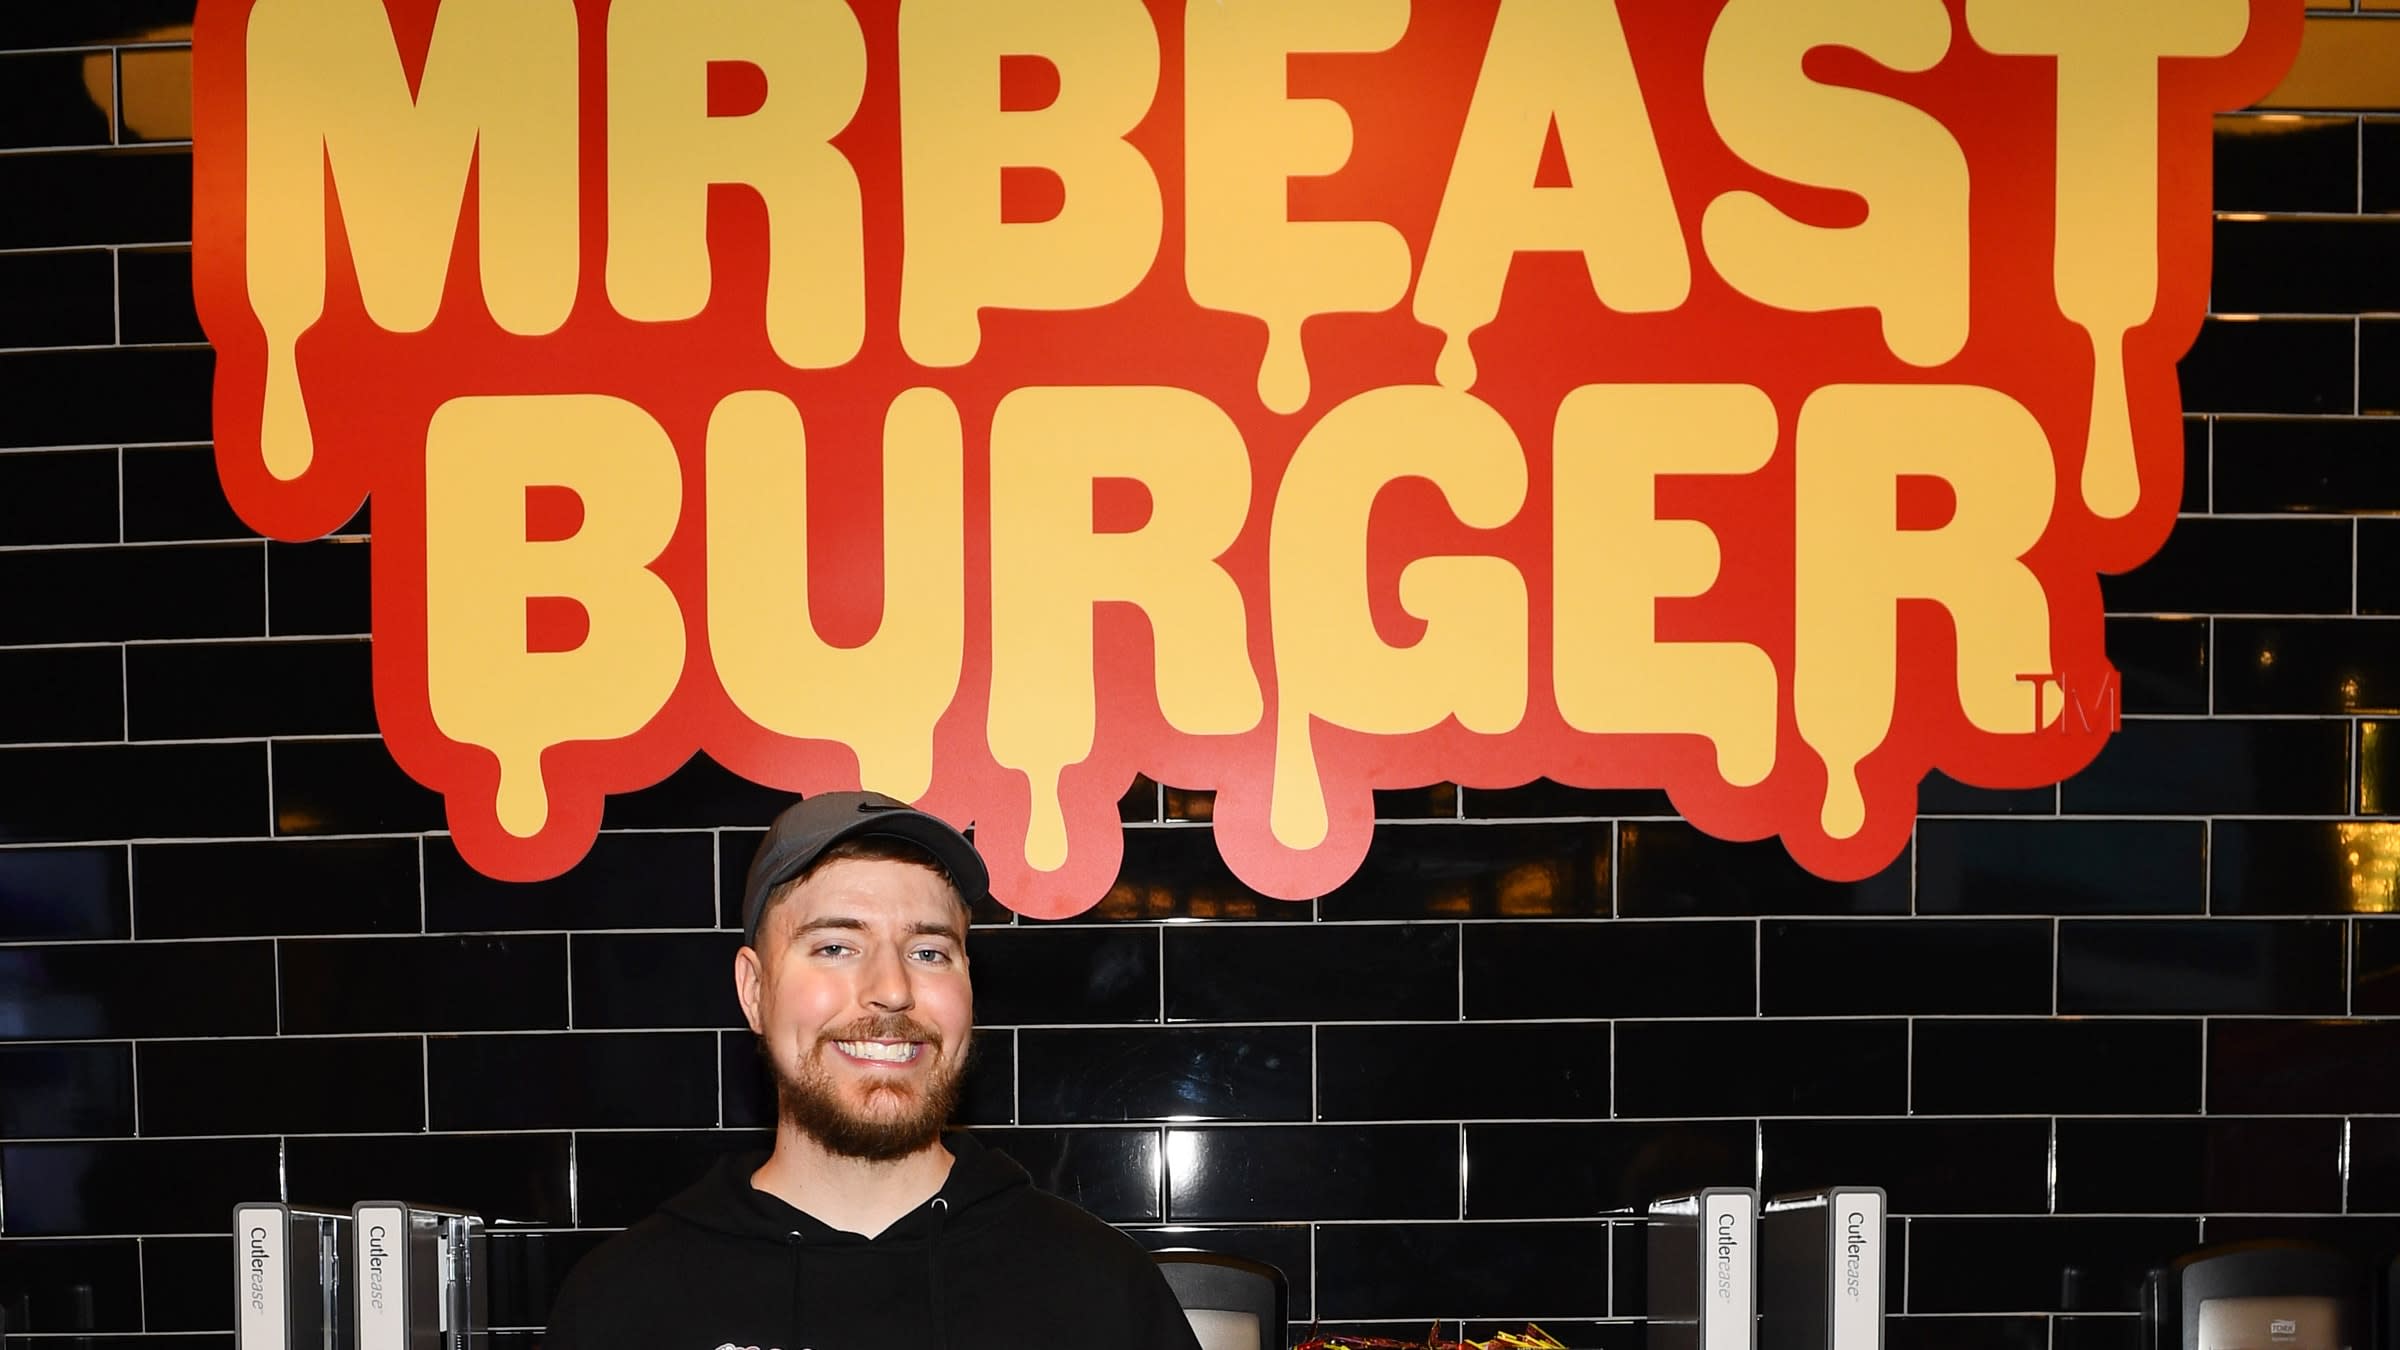 MrBeast is suing his ghost kitchen partner over 'inedible' MrBeast Burgers  - The Verge